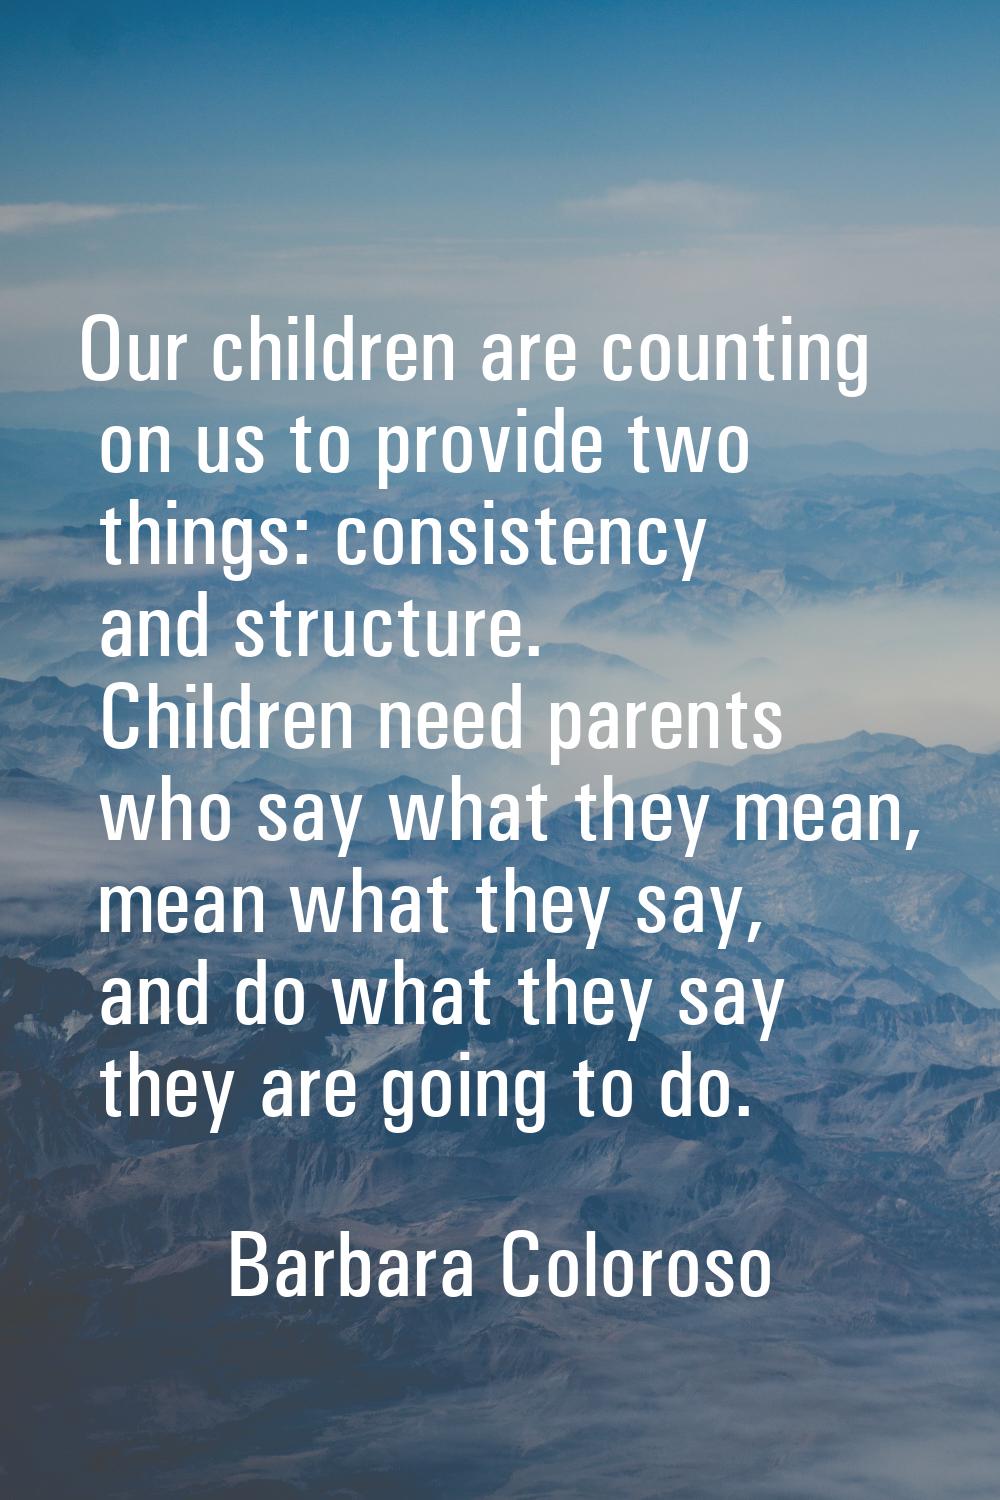 Our children are counting on us to provide two things: consistency and structure. Children need par